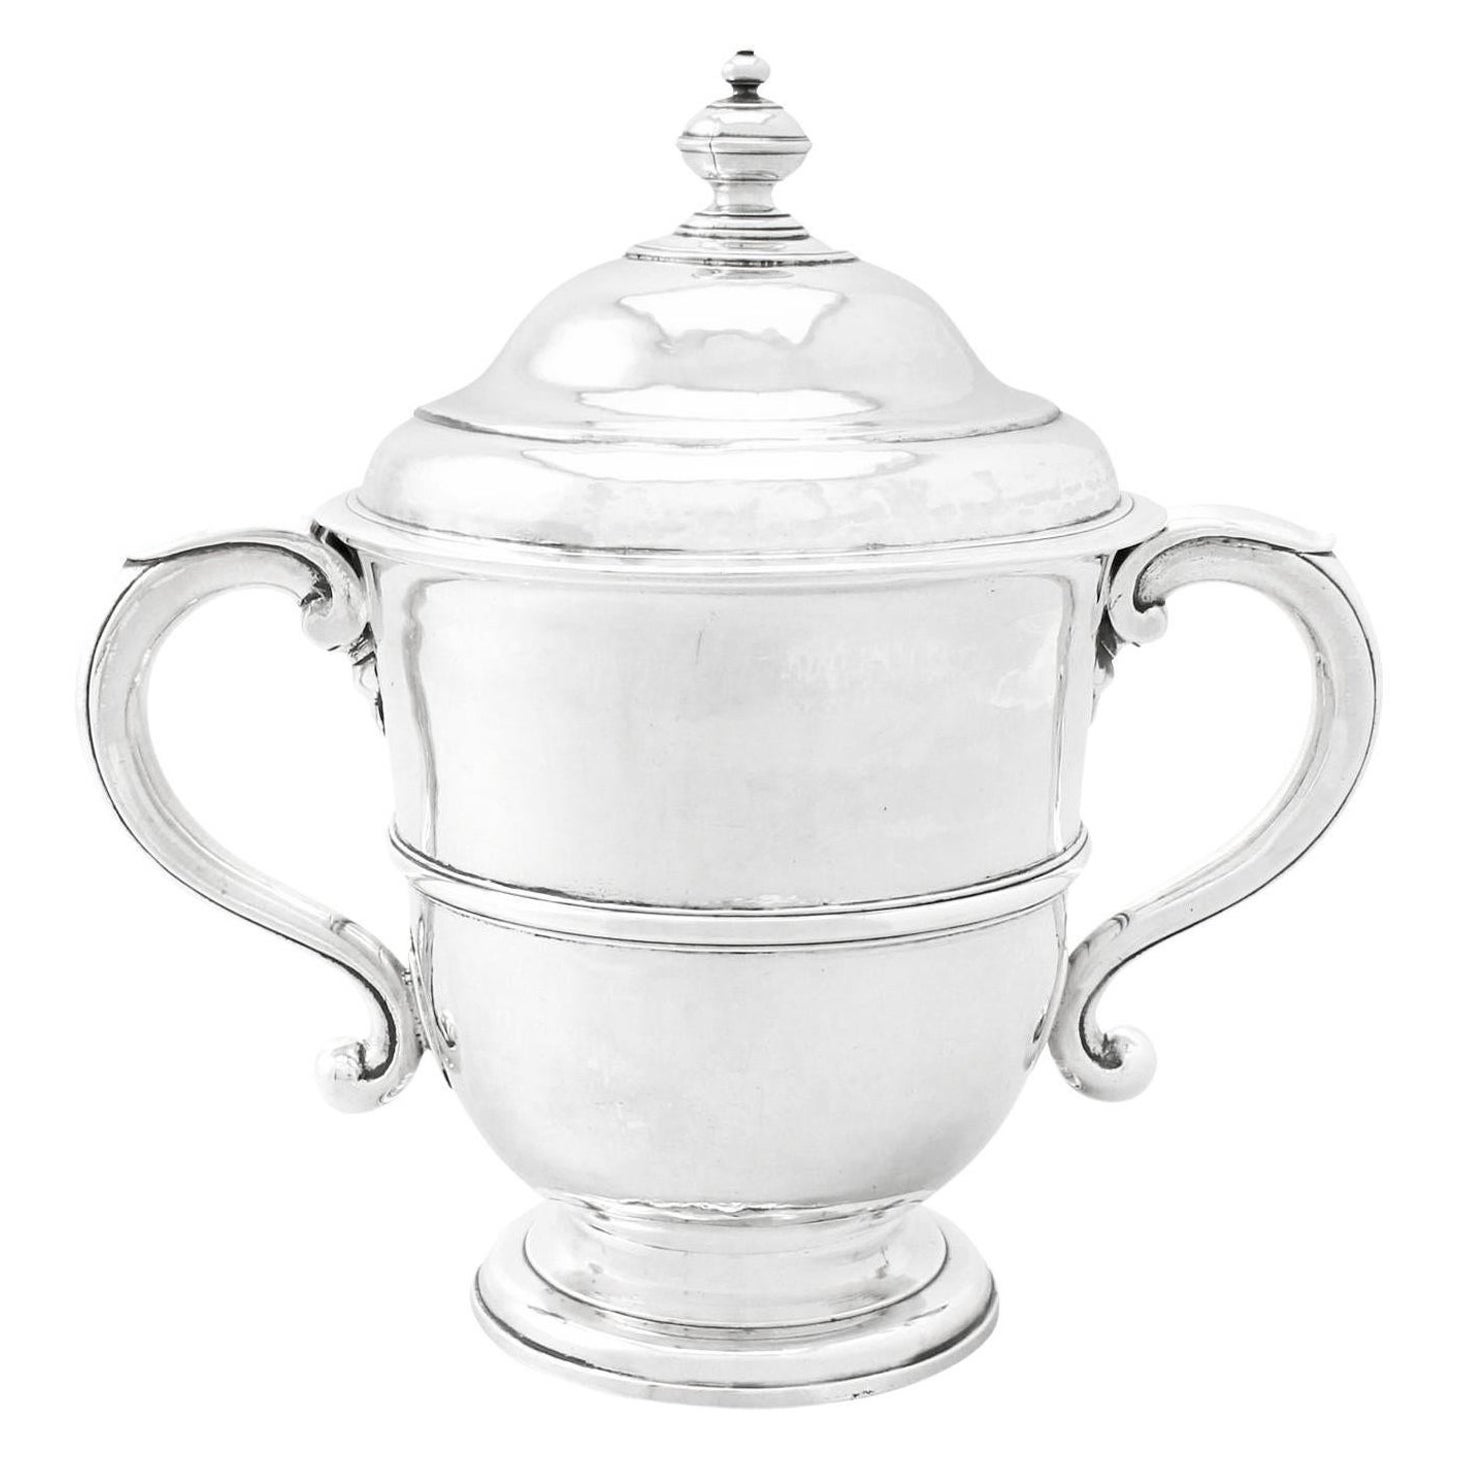 Antique Britannia Standard Silver Cup and Cover For Sale